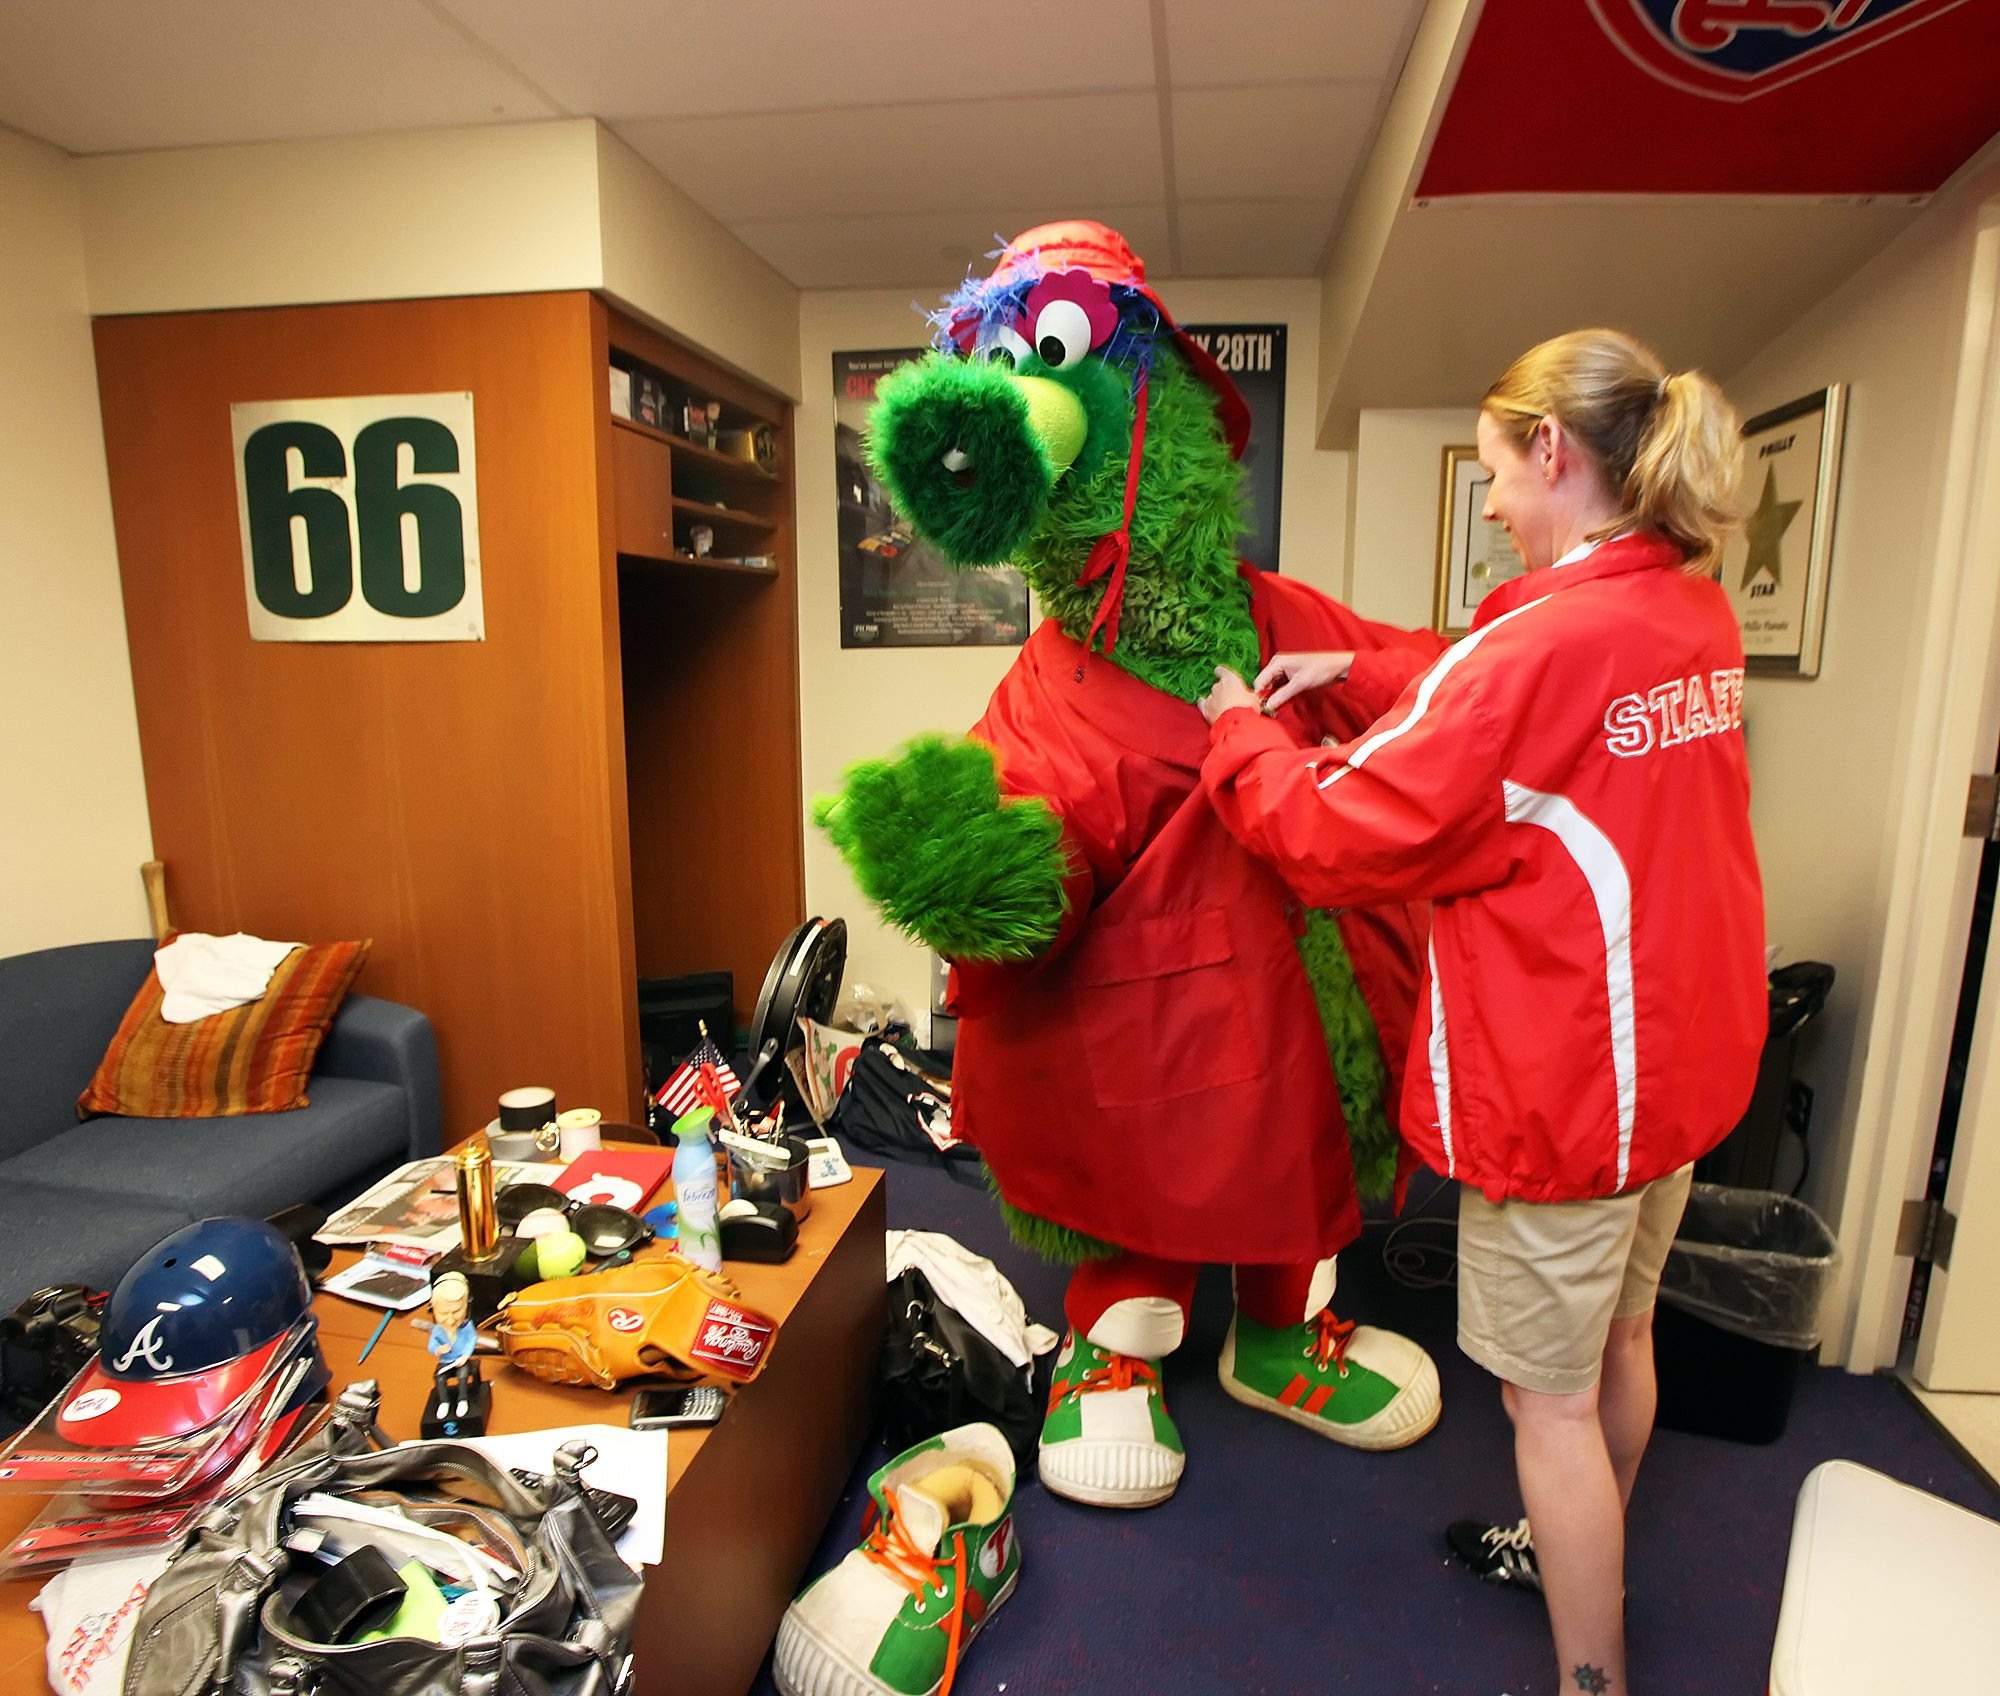 A day in the life of the Phillie Phanatic - Loquitur